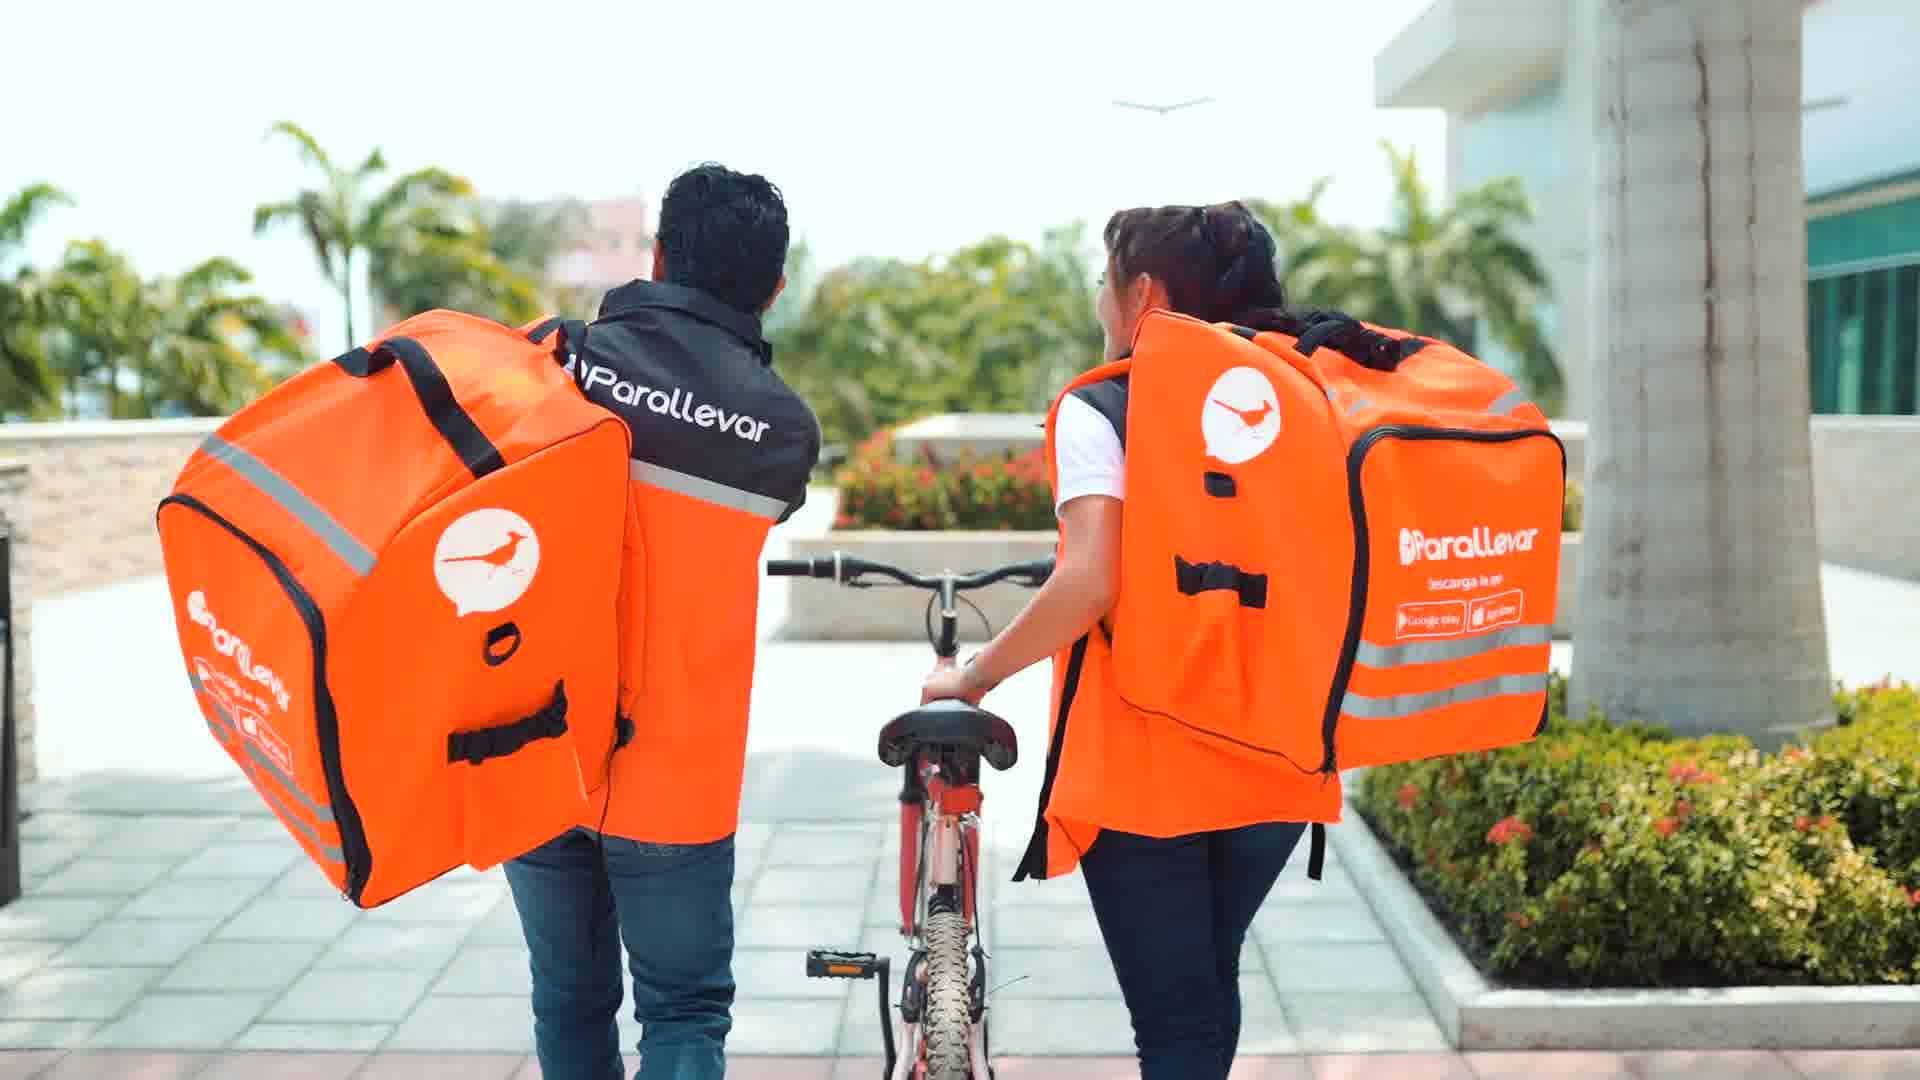 ecuadorian startup, parallevar, raises us$200,000 to compete in the delivery market